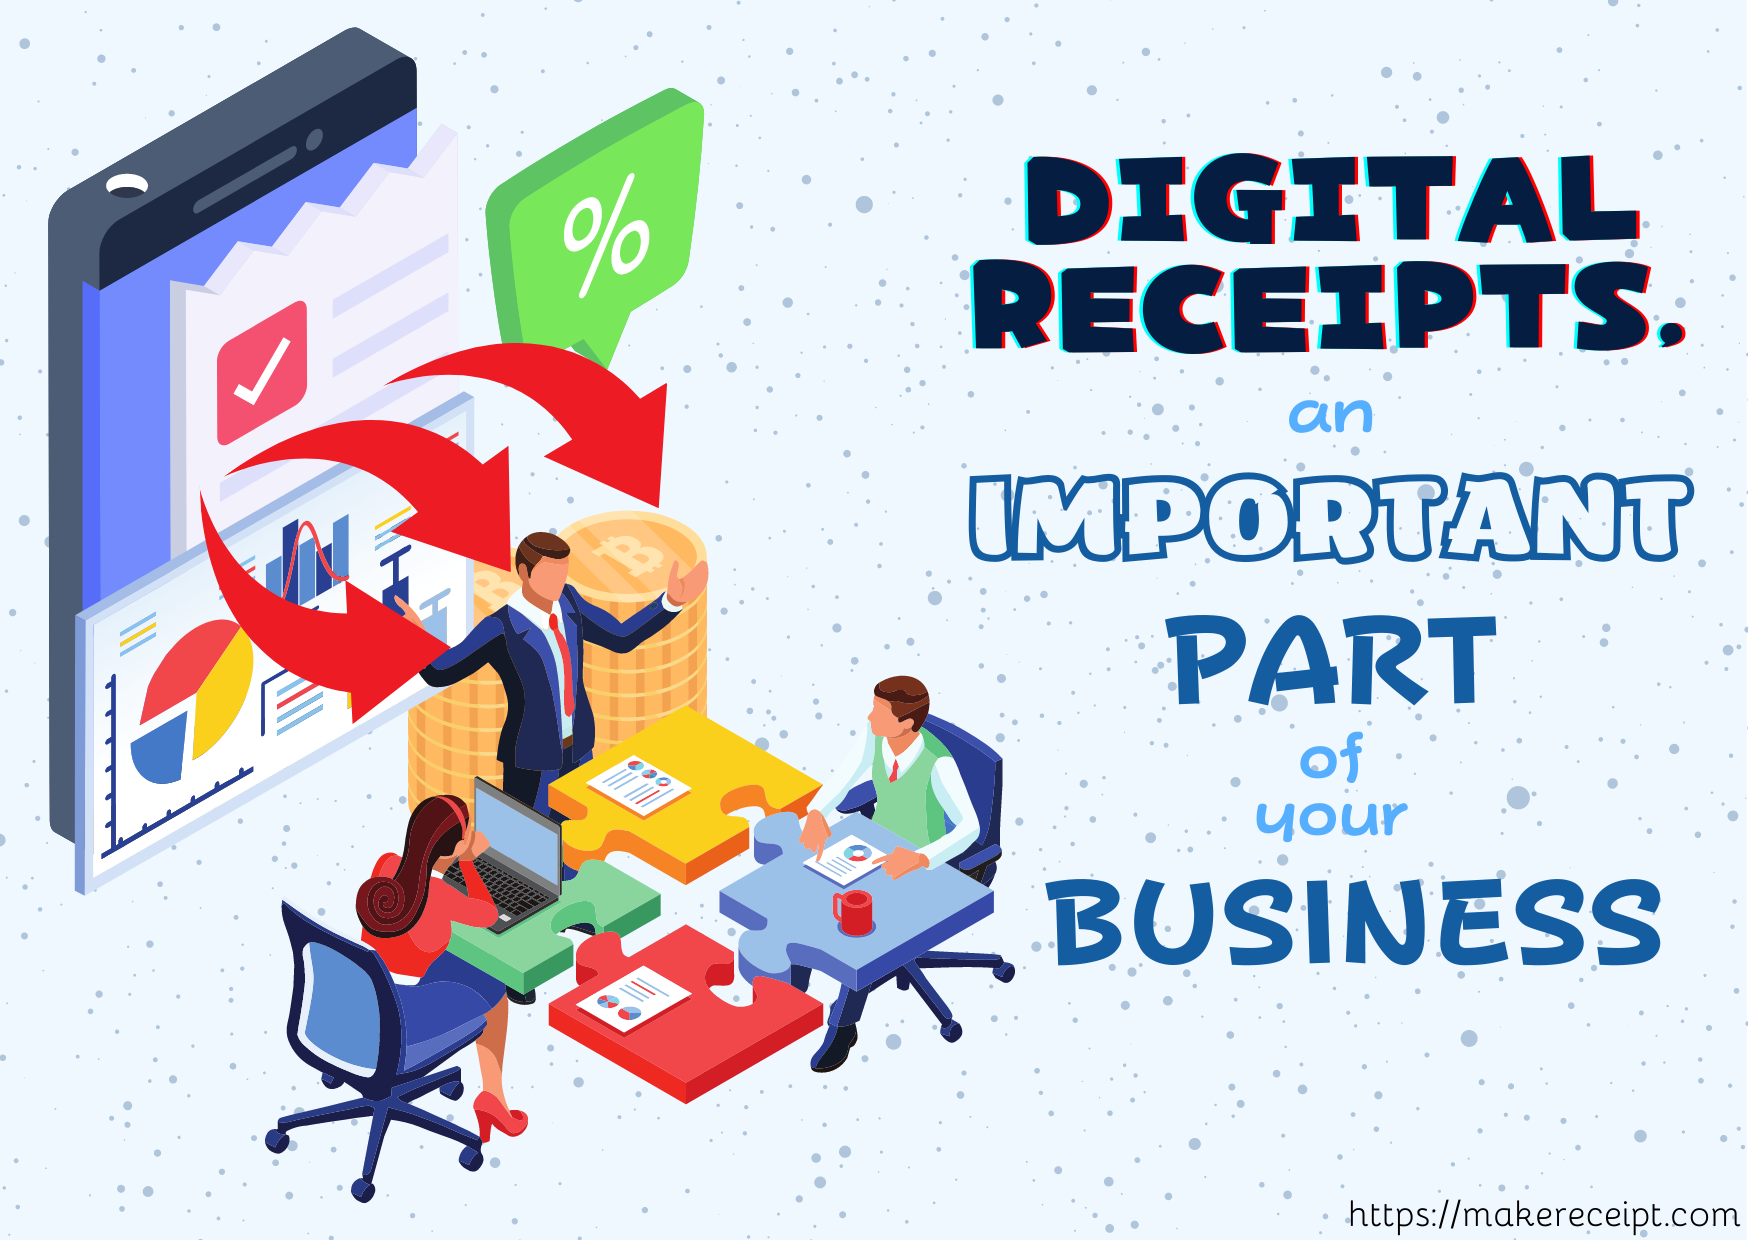 Digital Receipts, an Important Part of Your Business